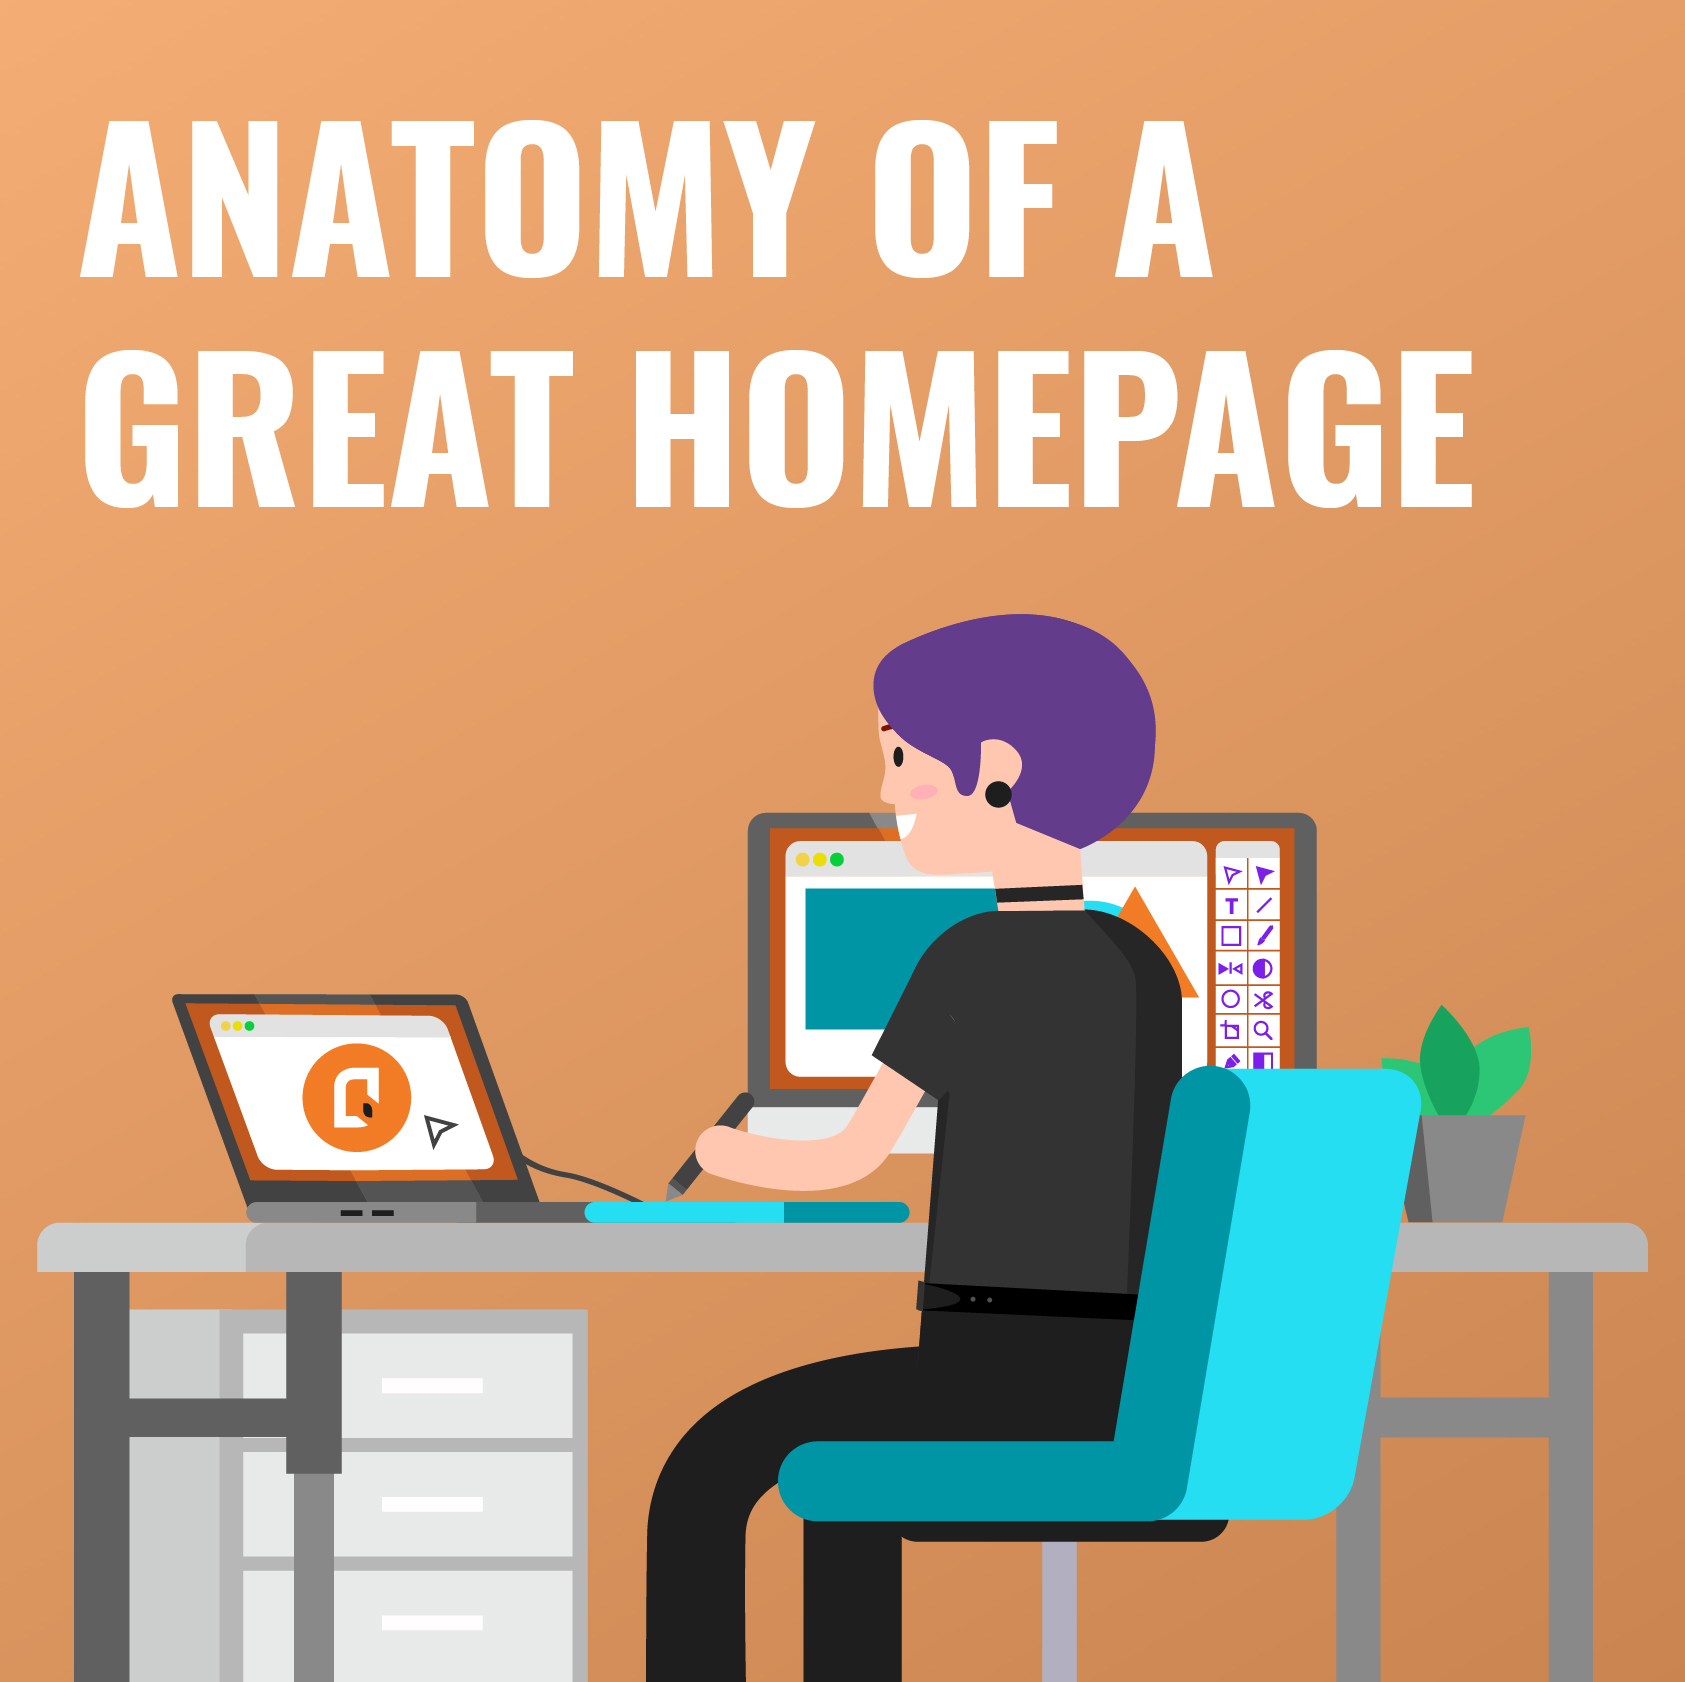 Anatomy of a great homepage.